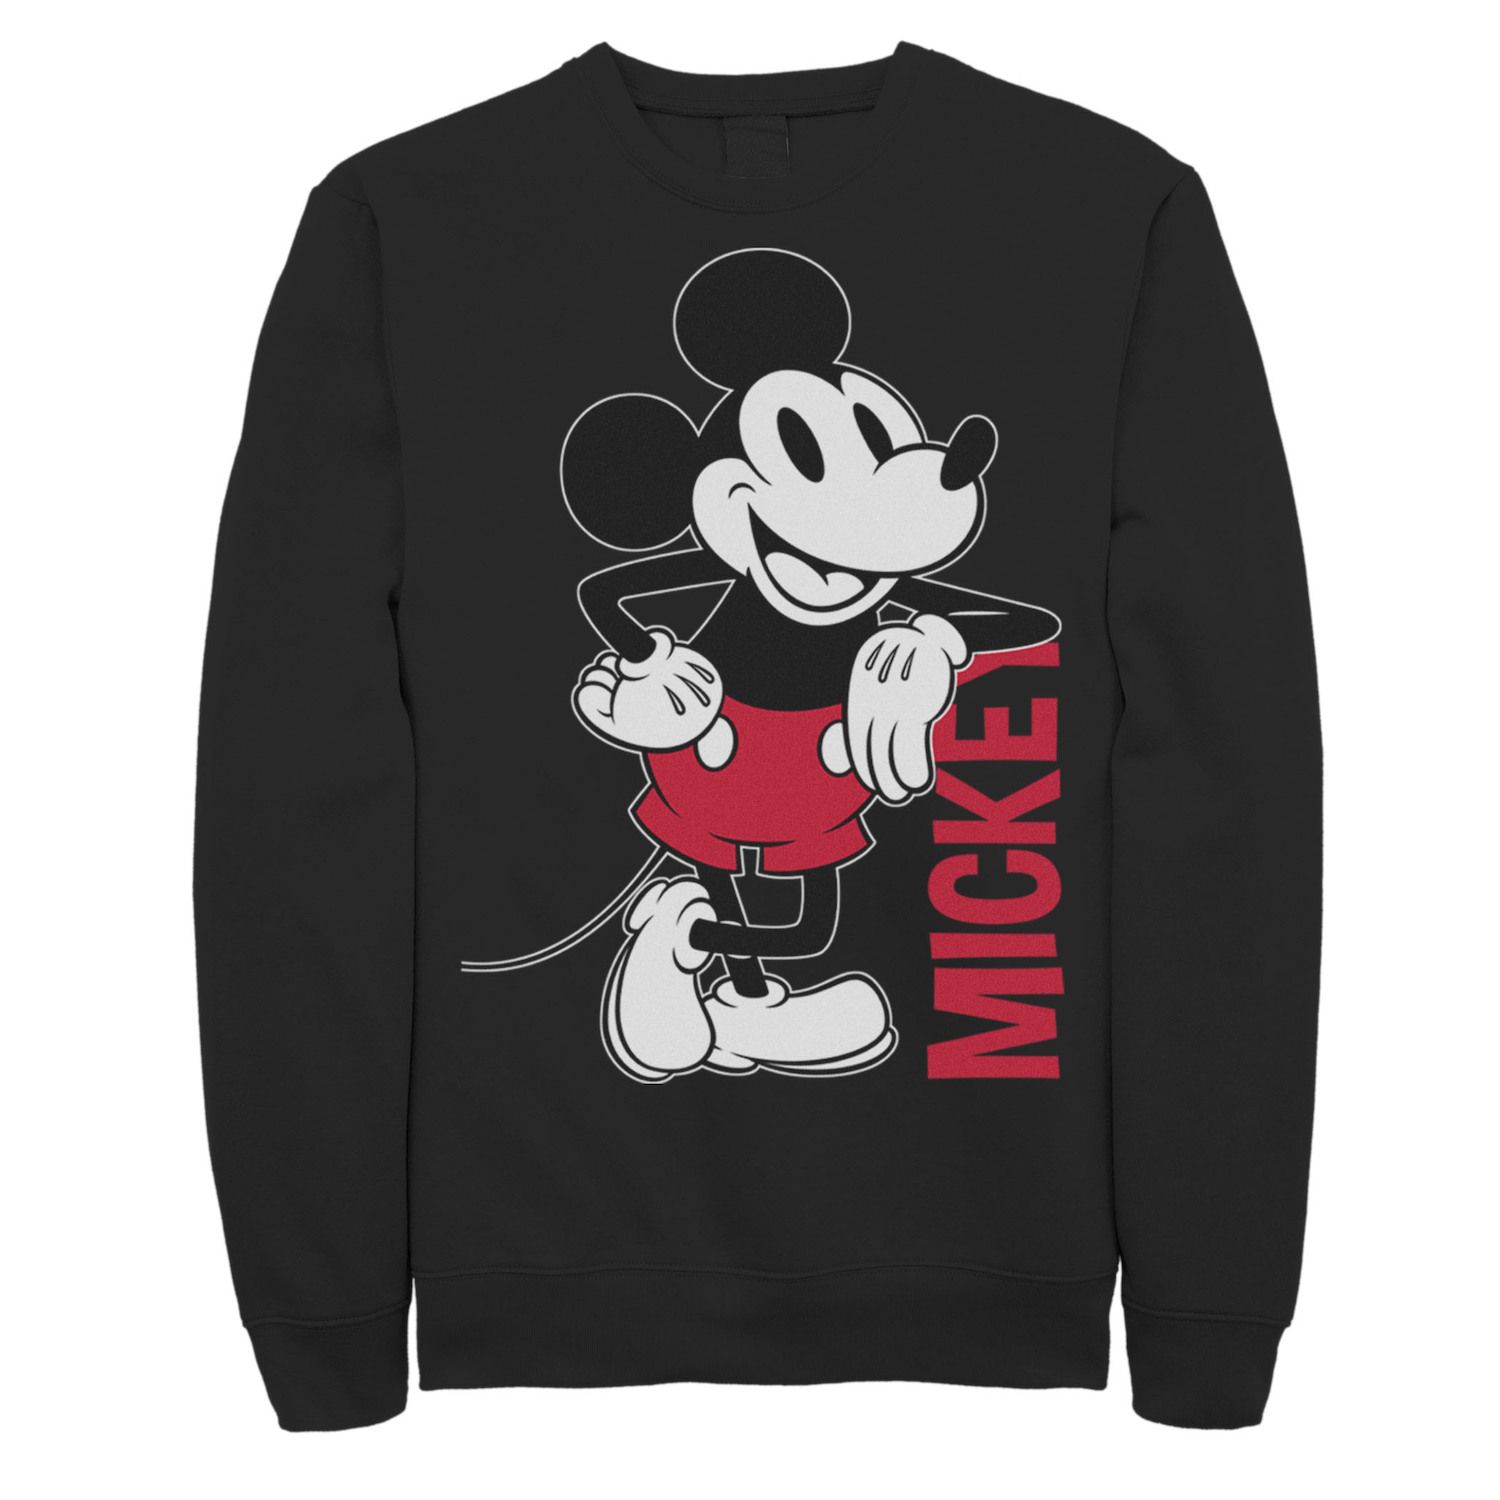 Image for Disney Men's Mickey Mouse Vintage Mickey Outline Sweatshirt at Kohl's.